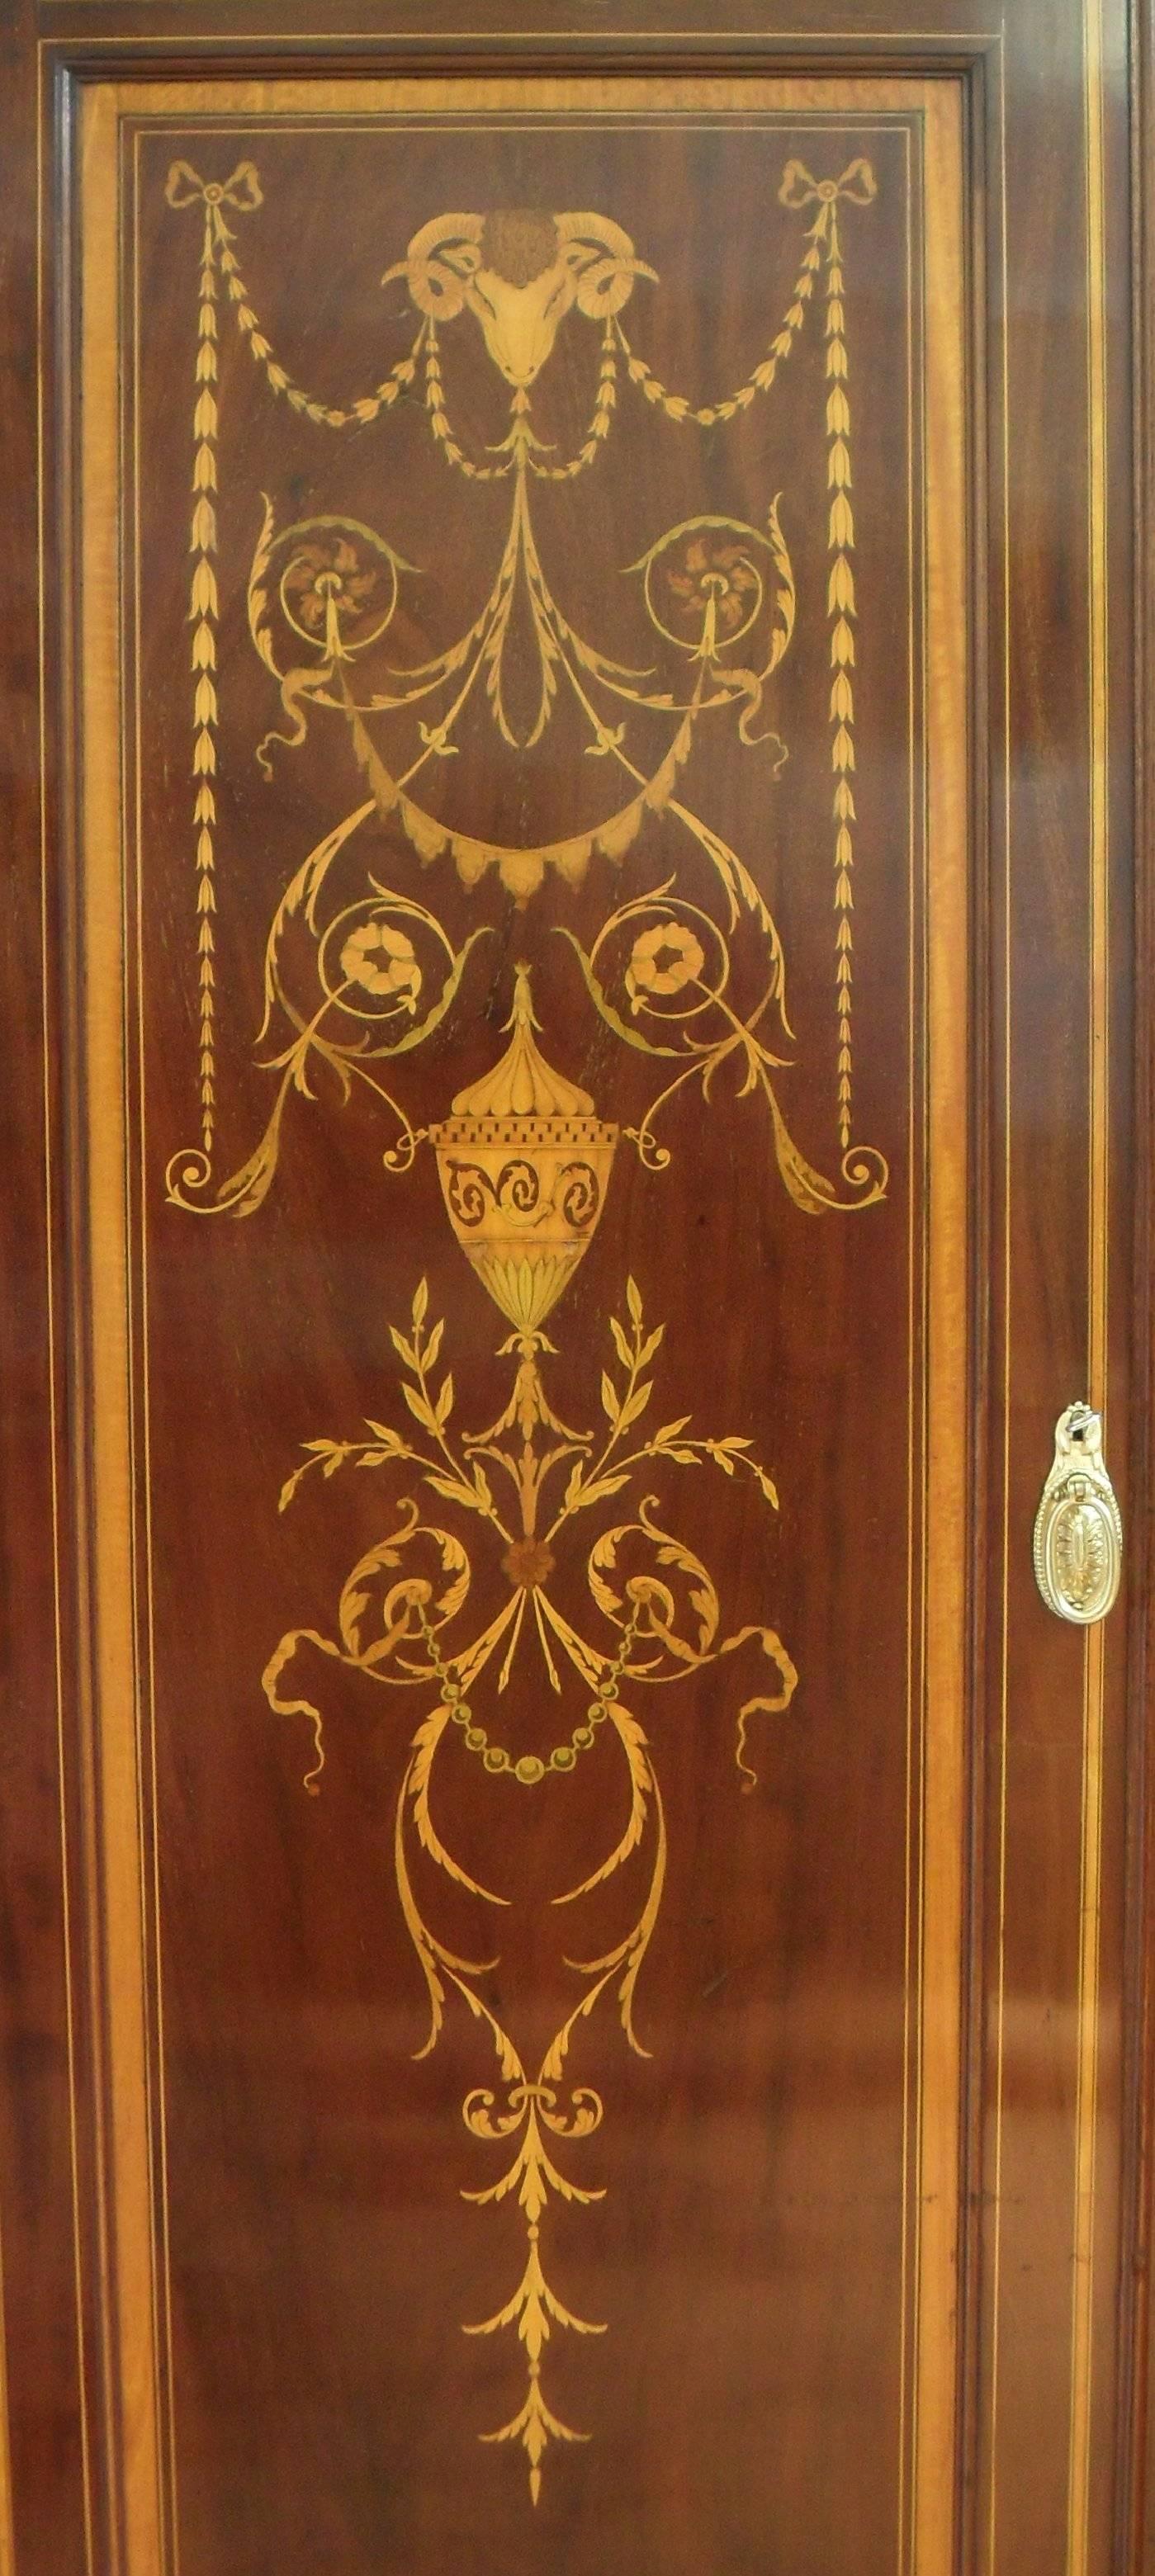 A magnificent quality Edwardian mahogany Sheraton revival wardrobe with fabulous cornice. The cornice has Greek key mouldings and swan neck pediment with a central rose and pierced fret work. The door panels are beautifully inlaid with a ram's head,